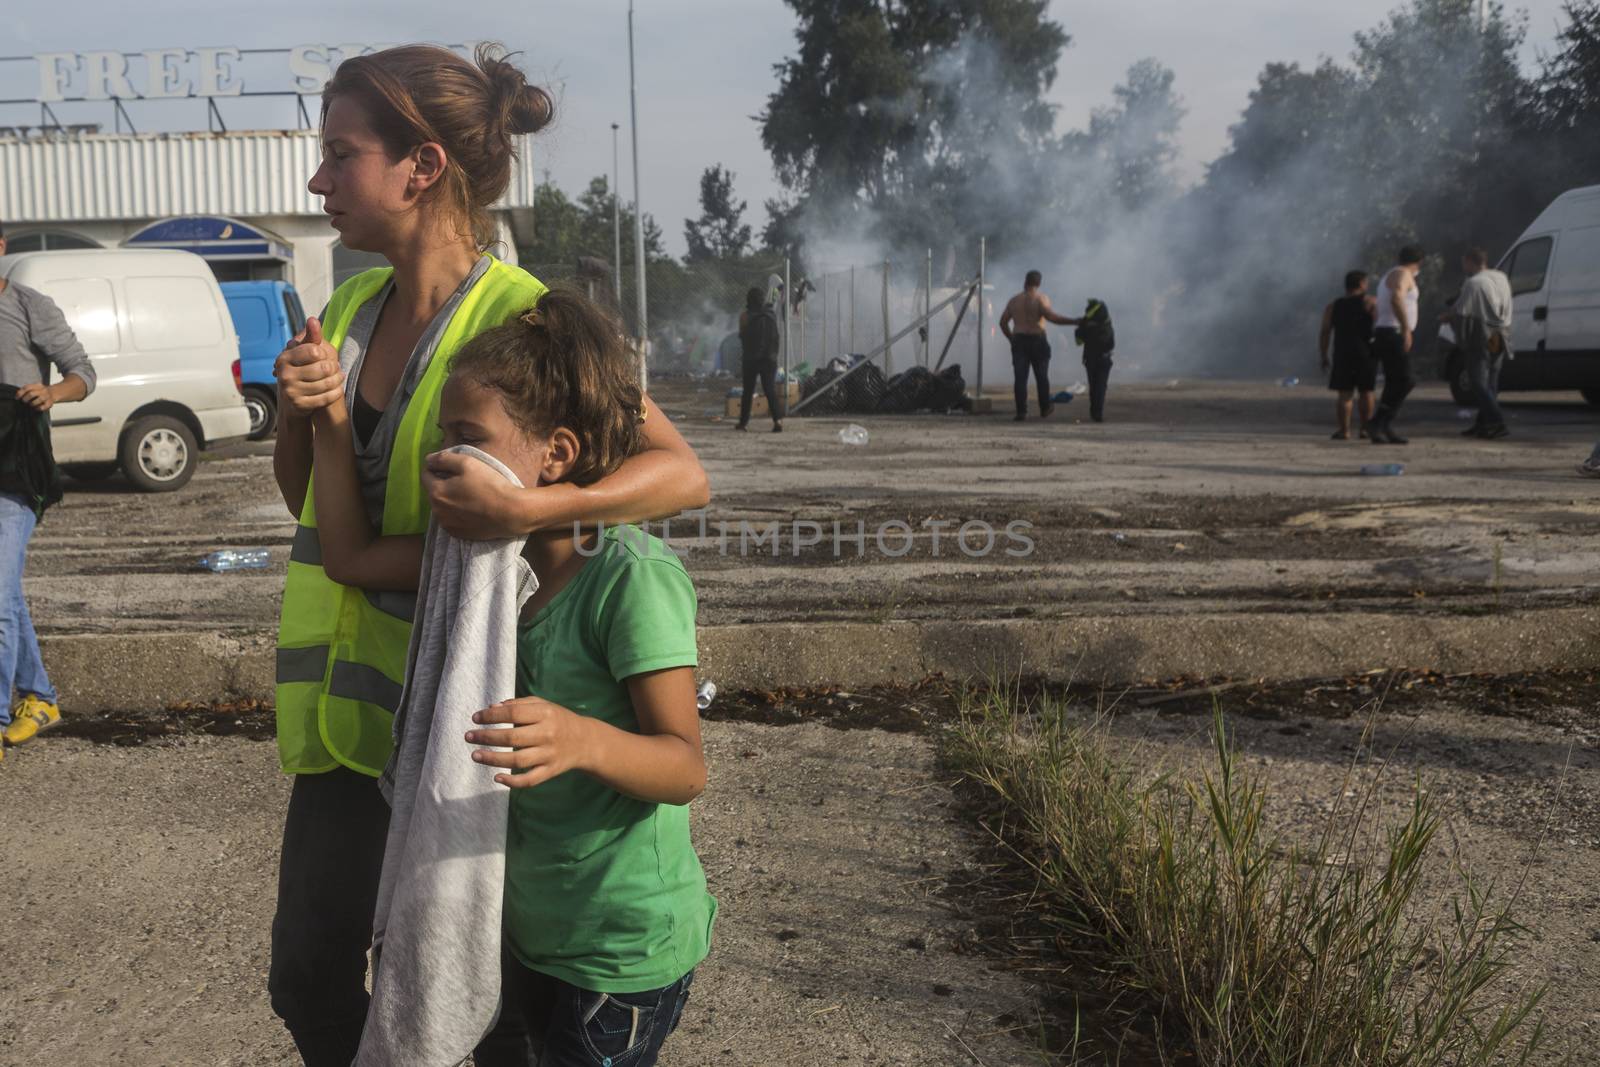 SERBIA, Horgos: A child's face is covered as Hungarian police fire tear gas and water cannons into the refugees in the Serbian border town of Horgos on September 16, 2015, after Hungary closed its border in an effort to stem the wave of refugees entering the country. ****Restriction: No Russia or Asia sales****